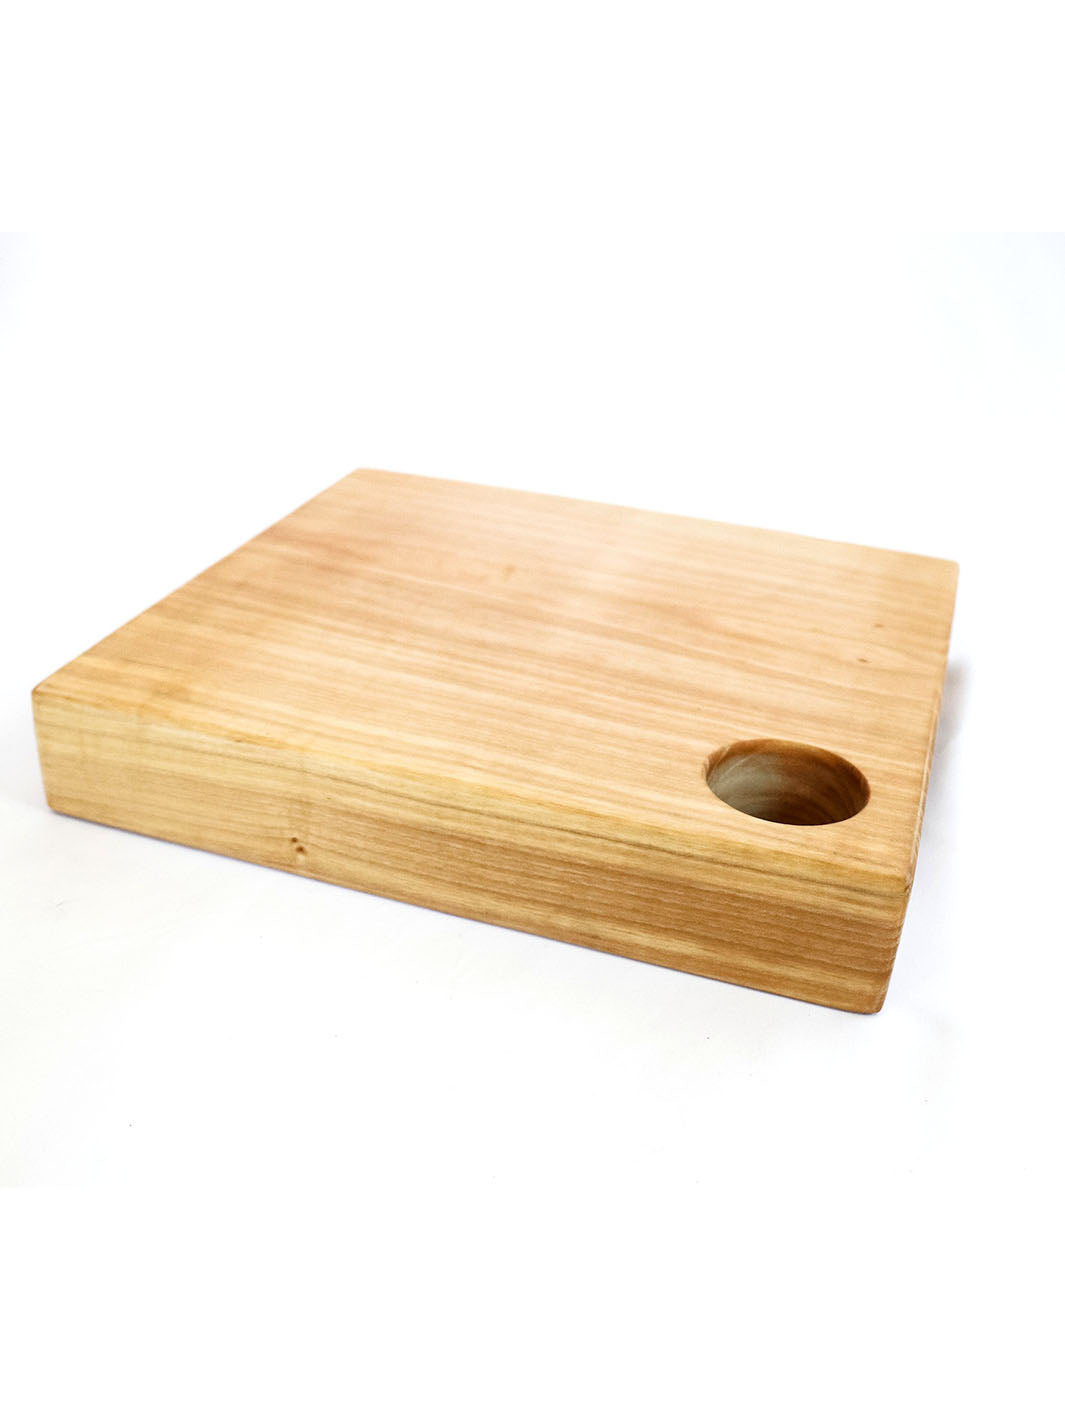 Thick Ash Butcher Block Cutting Board (in stock) Earthly Comfort Cutting Board 1246-3